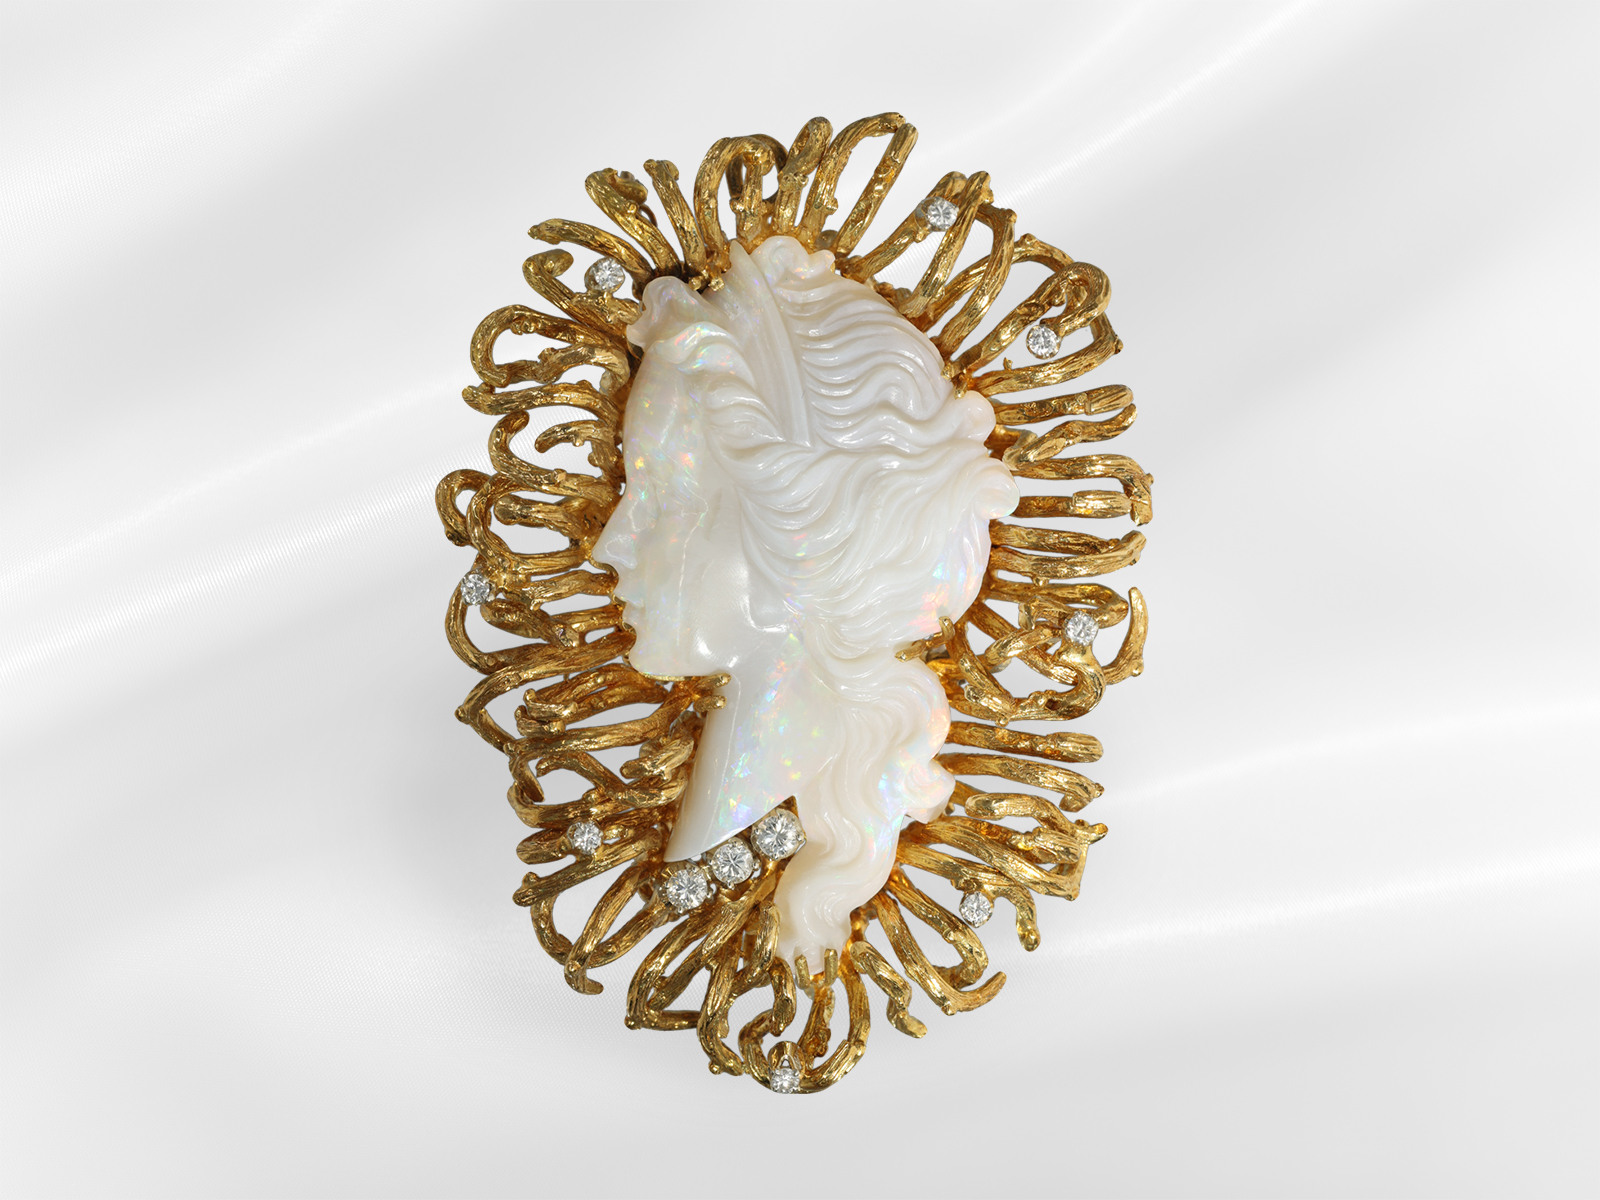 Brooch/pendant: unusual vintage goldsmith work with opal cameo, possibly Andrew Grima - Image 2 of 6